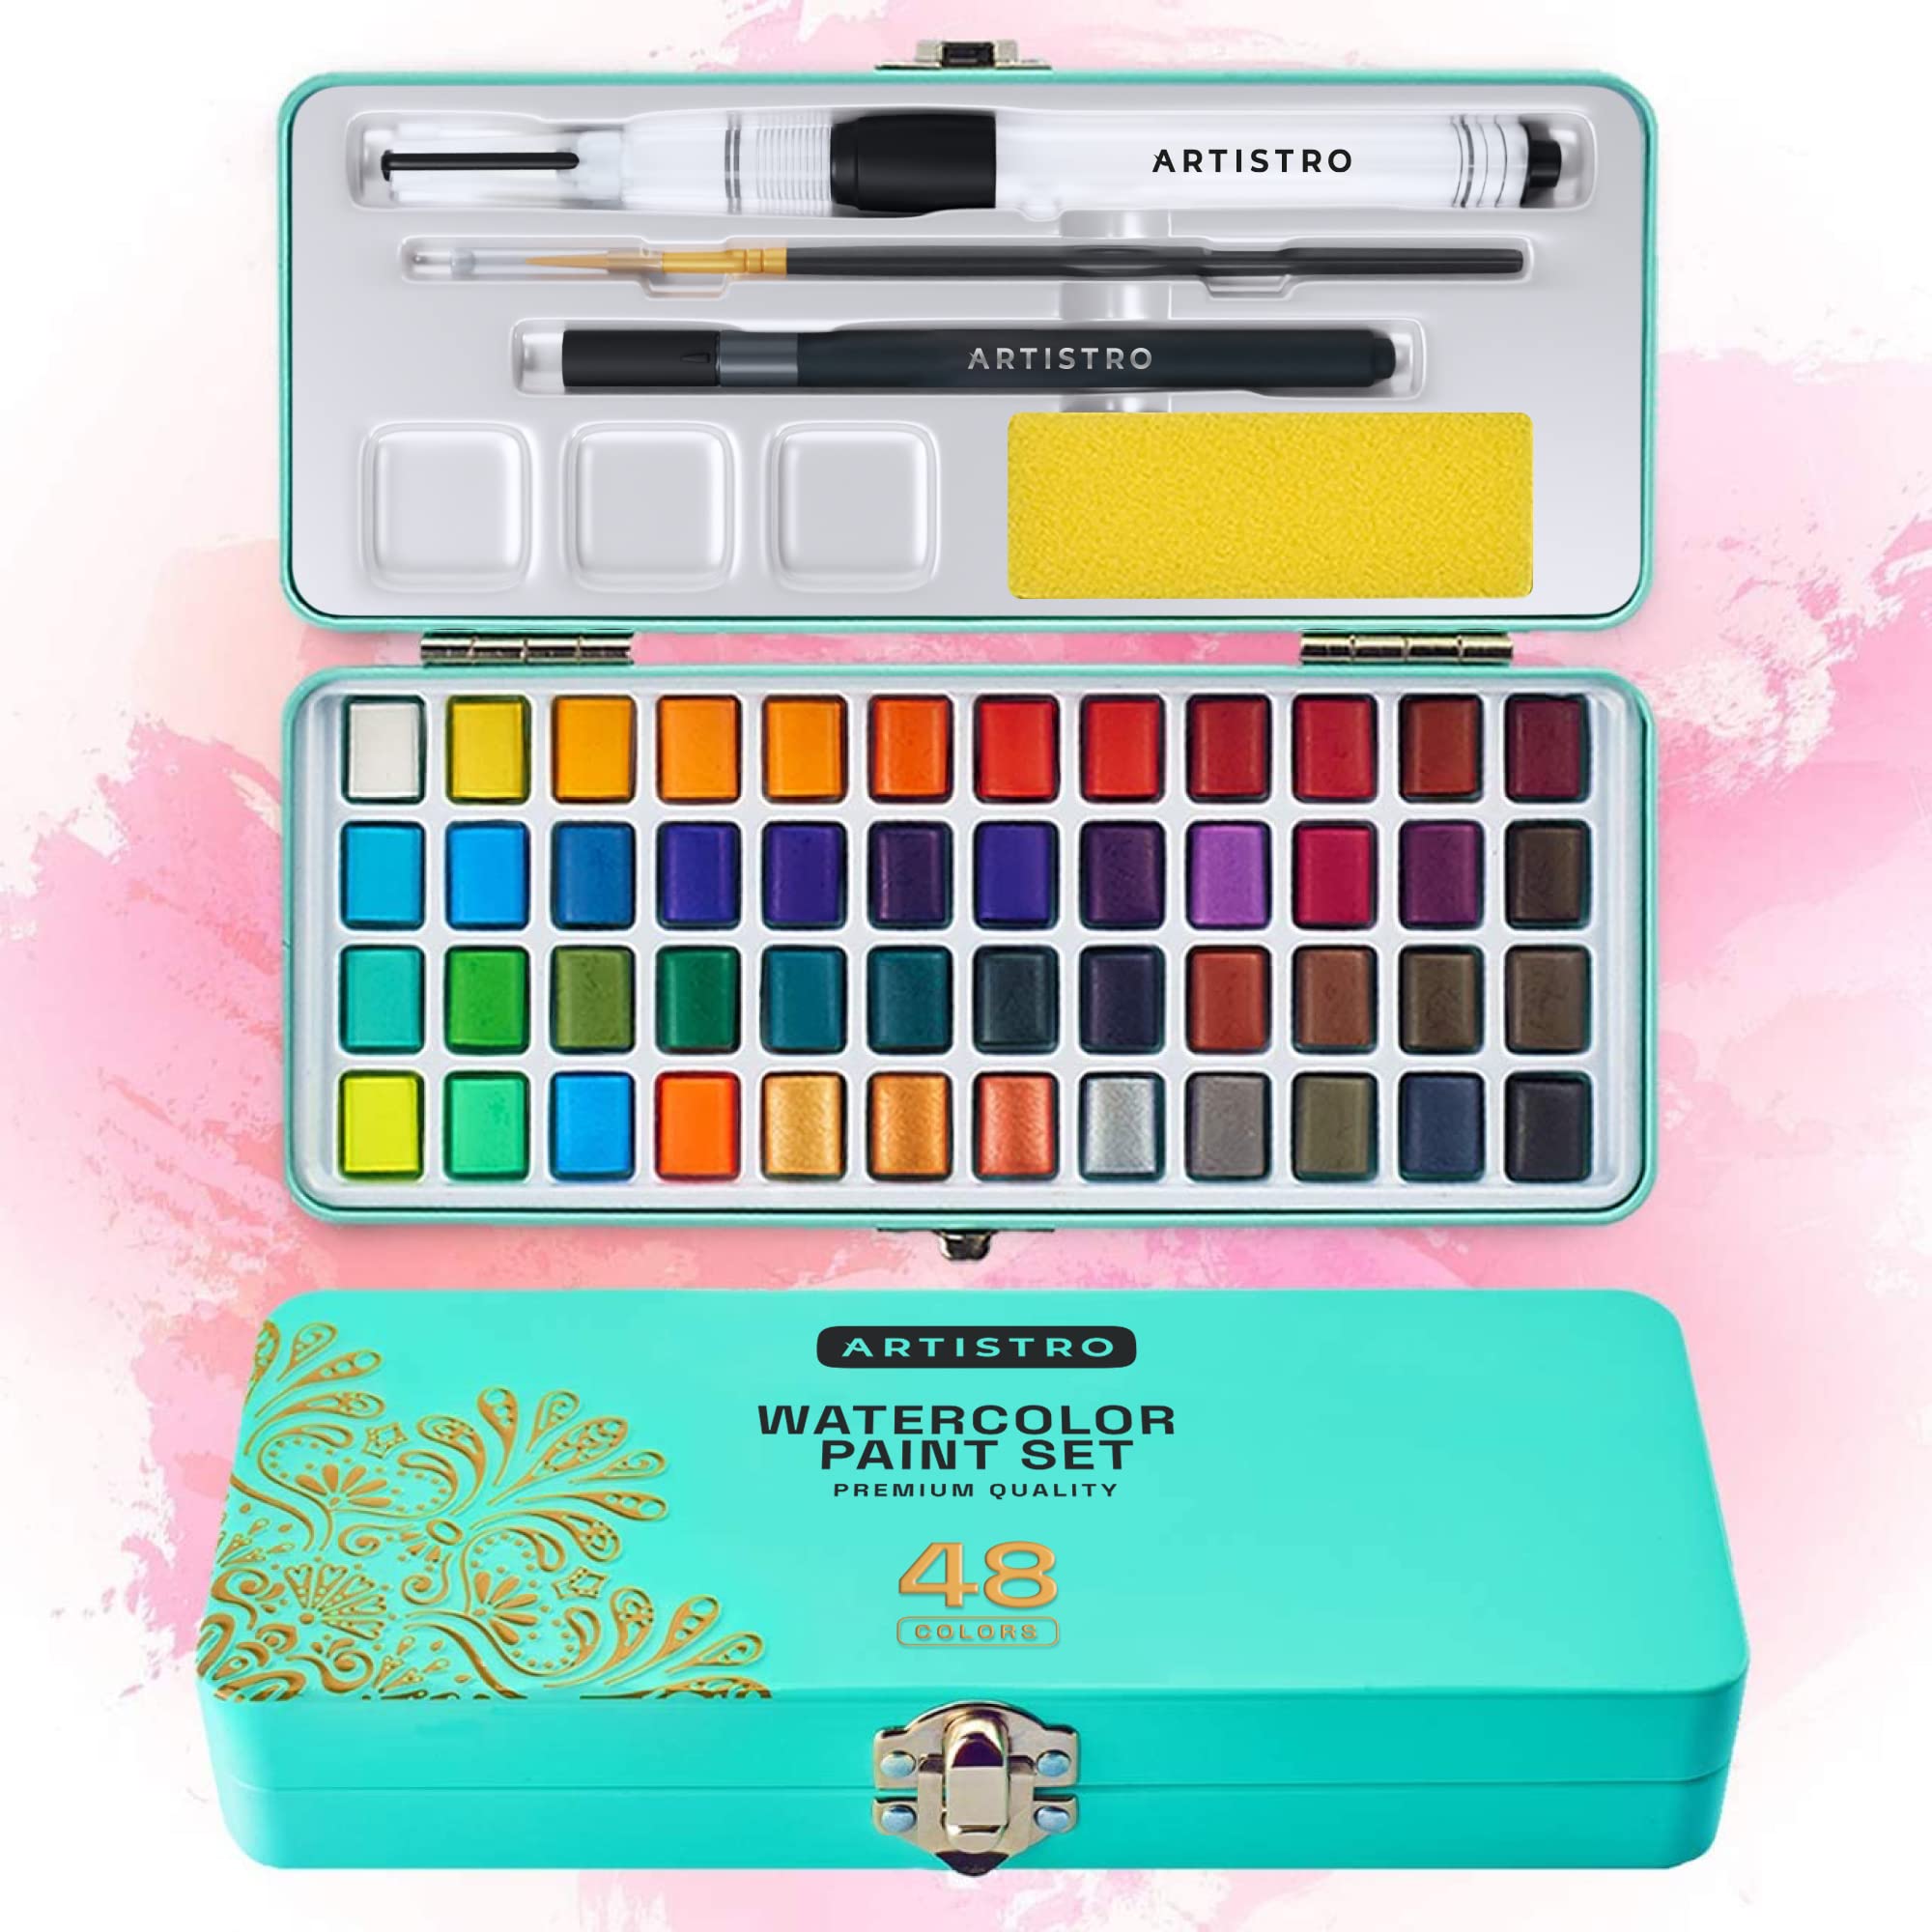 Artistro Watercolour Paint Set  First Impressions + Swatches 